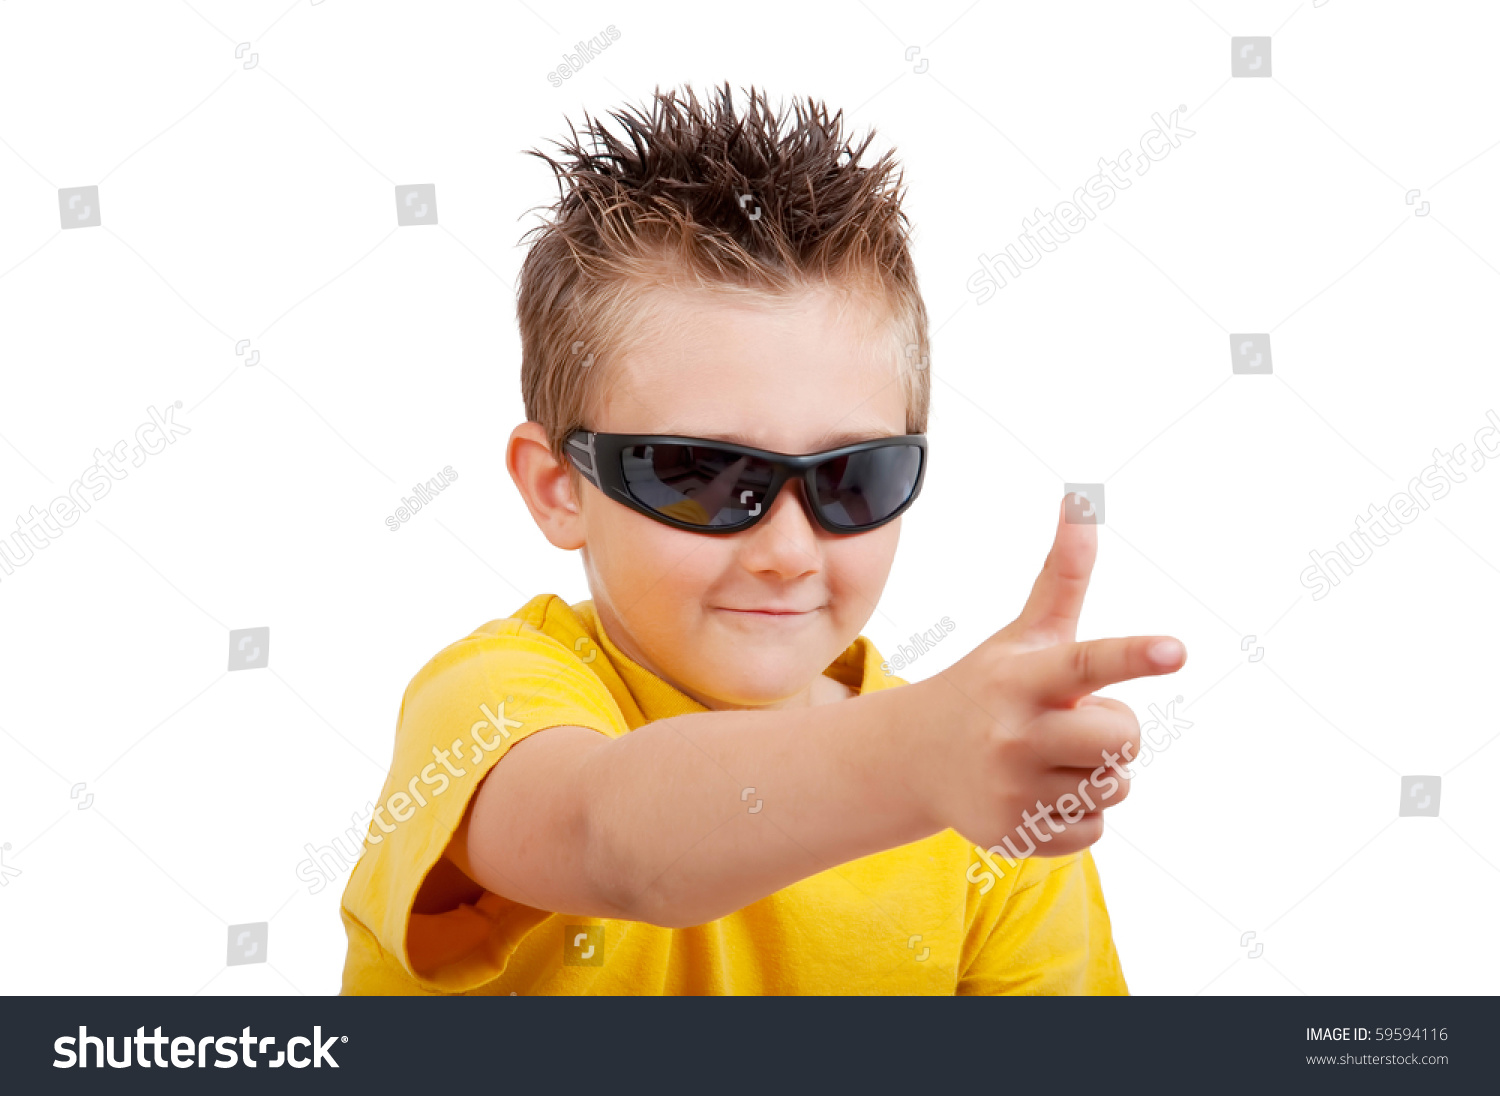 stock-photo-boy-with-sunglasses-and-hand